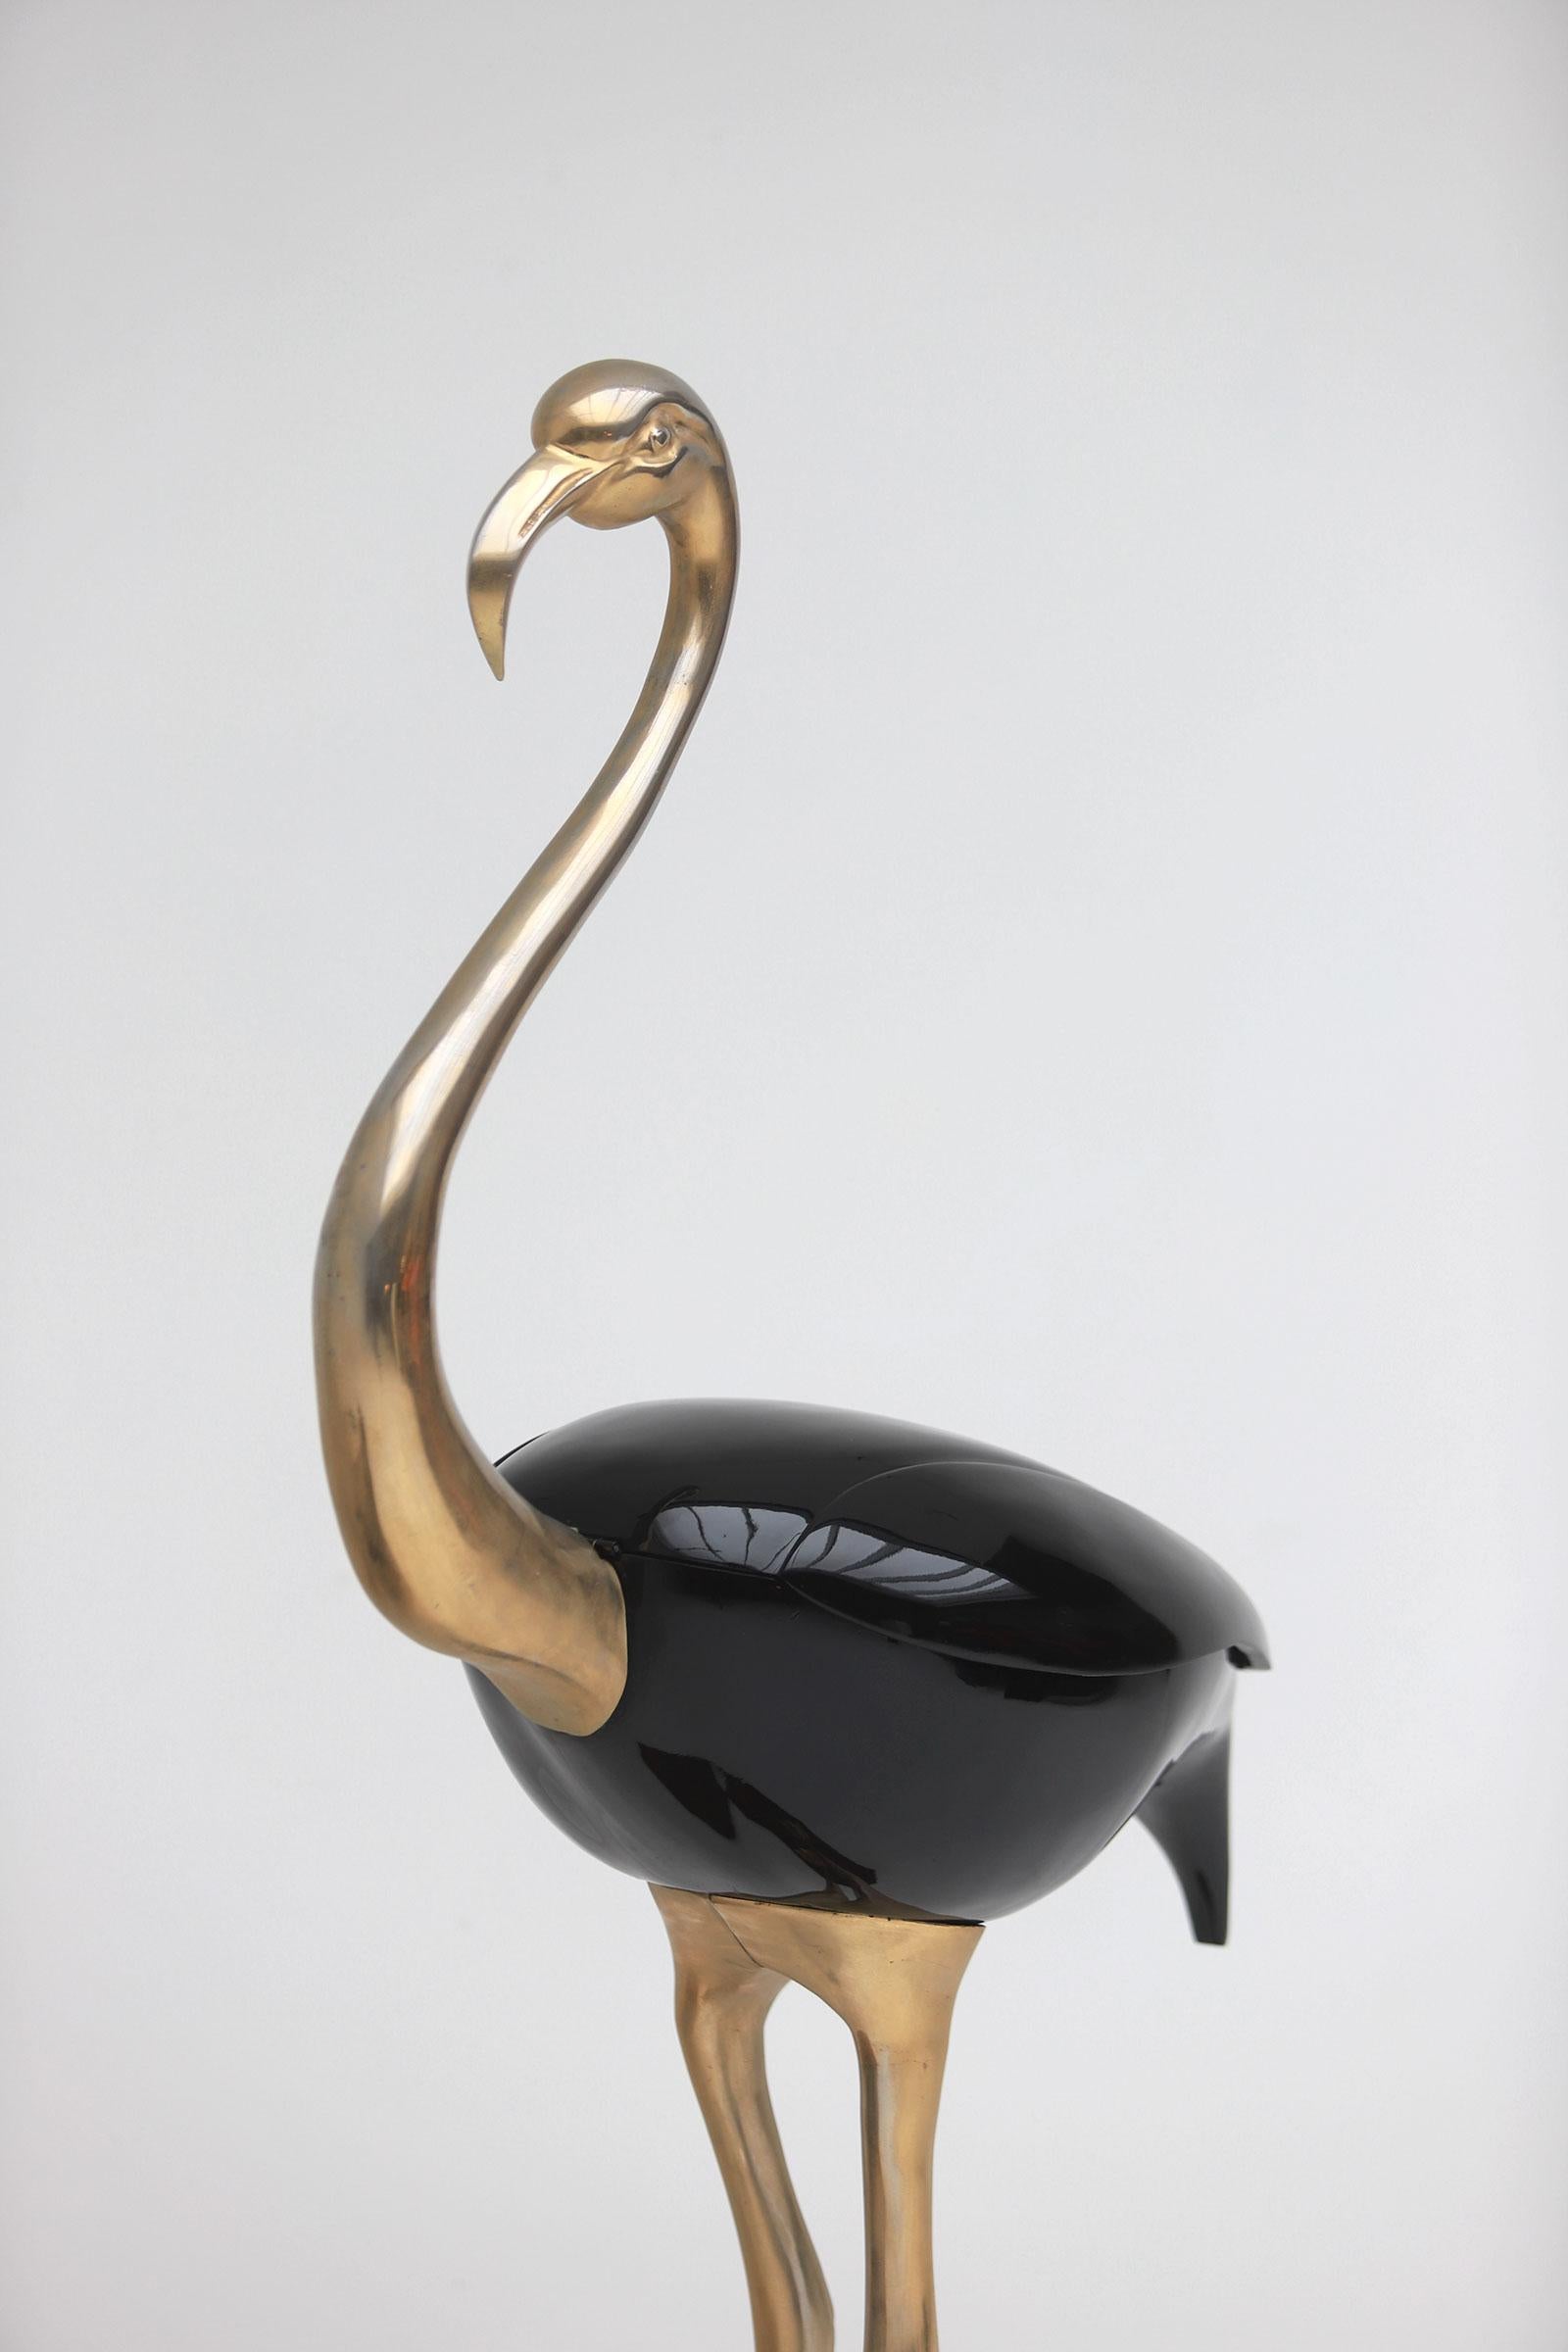 Lifesize Brass Flamingo with storage compartment by Fondica 1970s For Sale 7